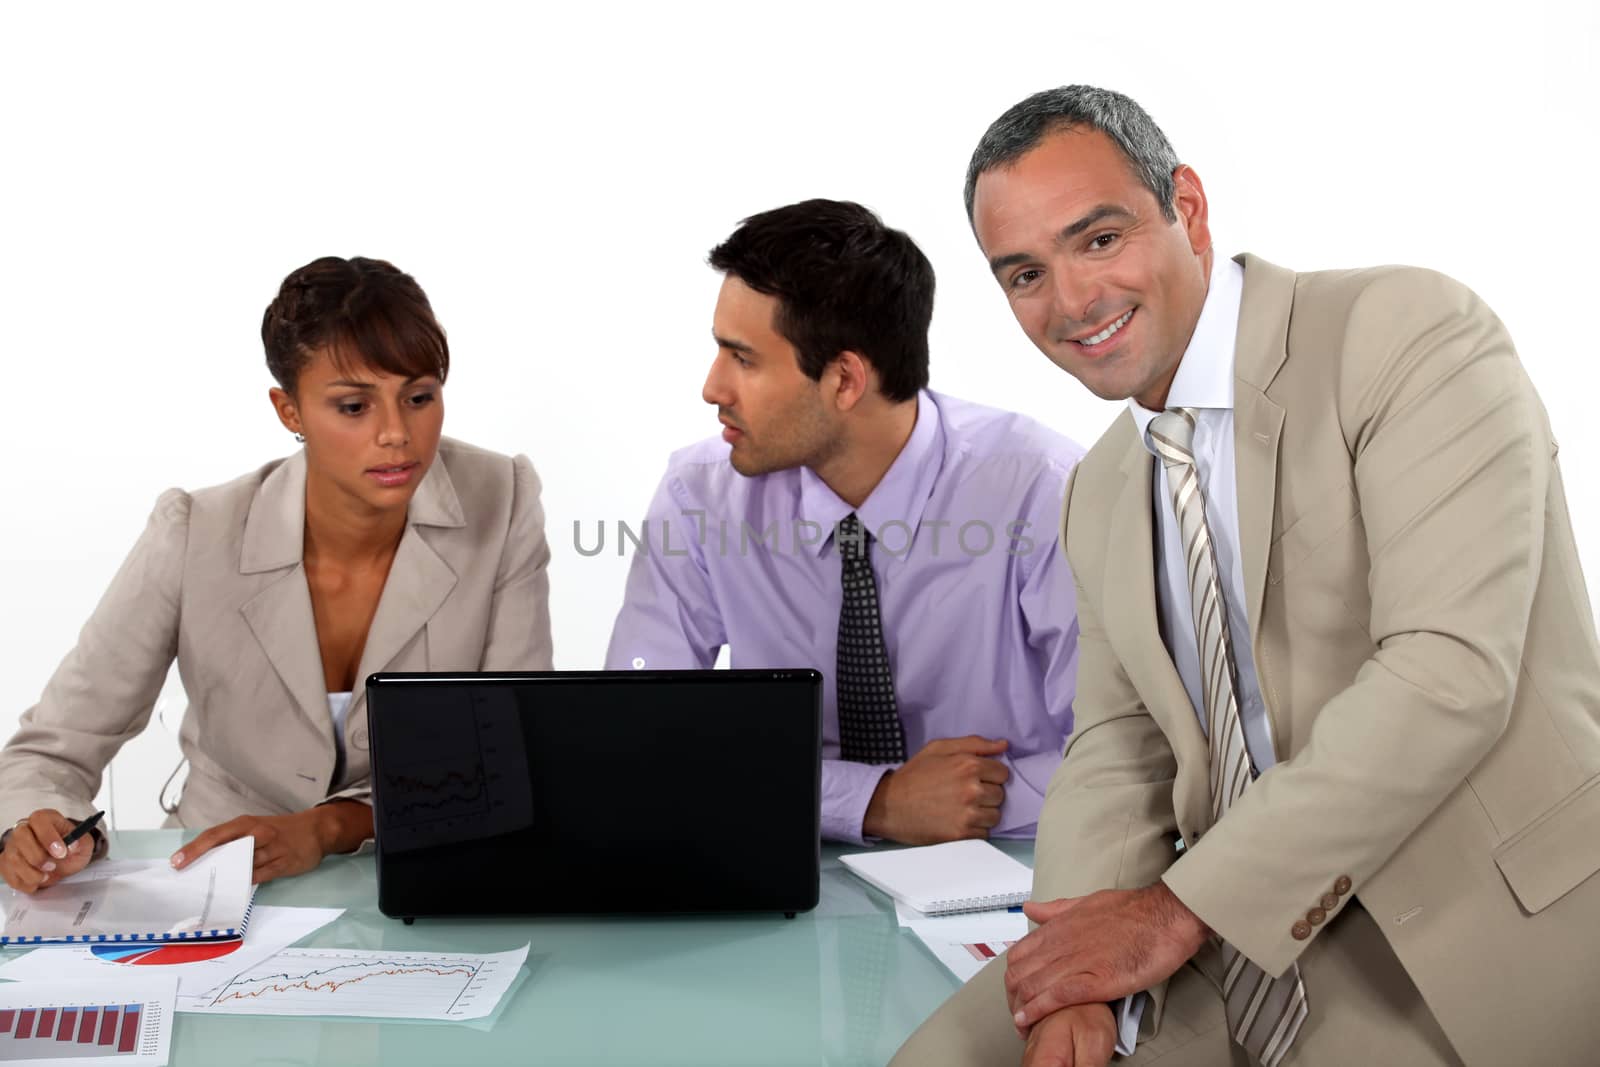 Three business colleagues at a desk